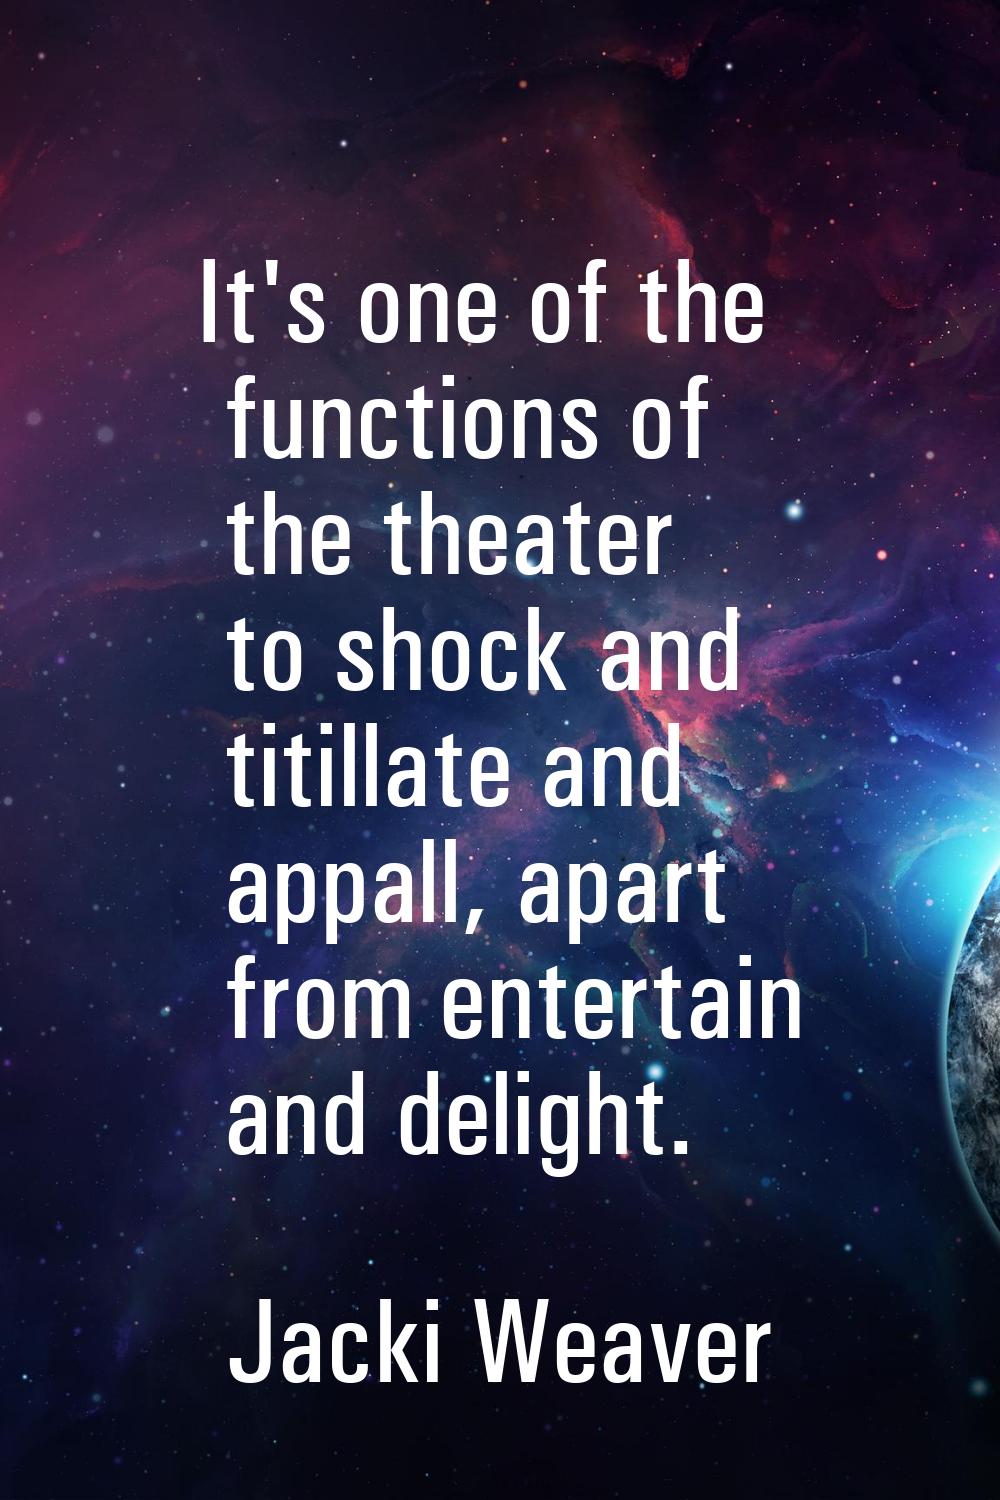 It's one of the functions of the theater to shock and titillate and appall, apart from entertain an